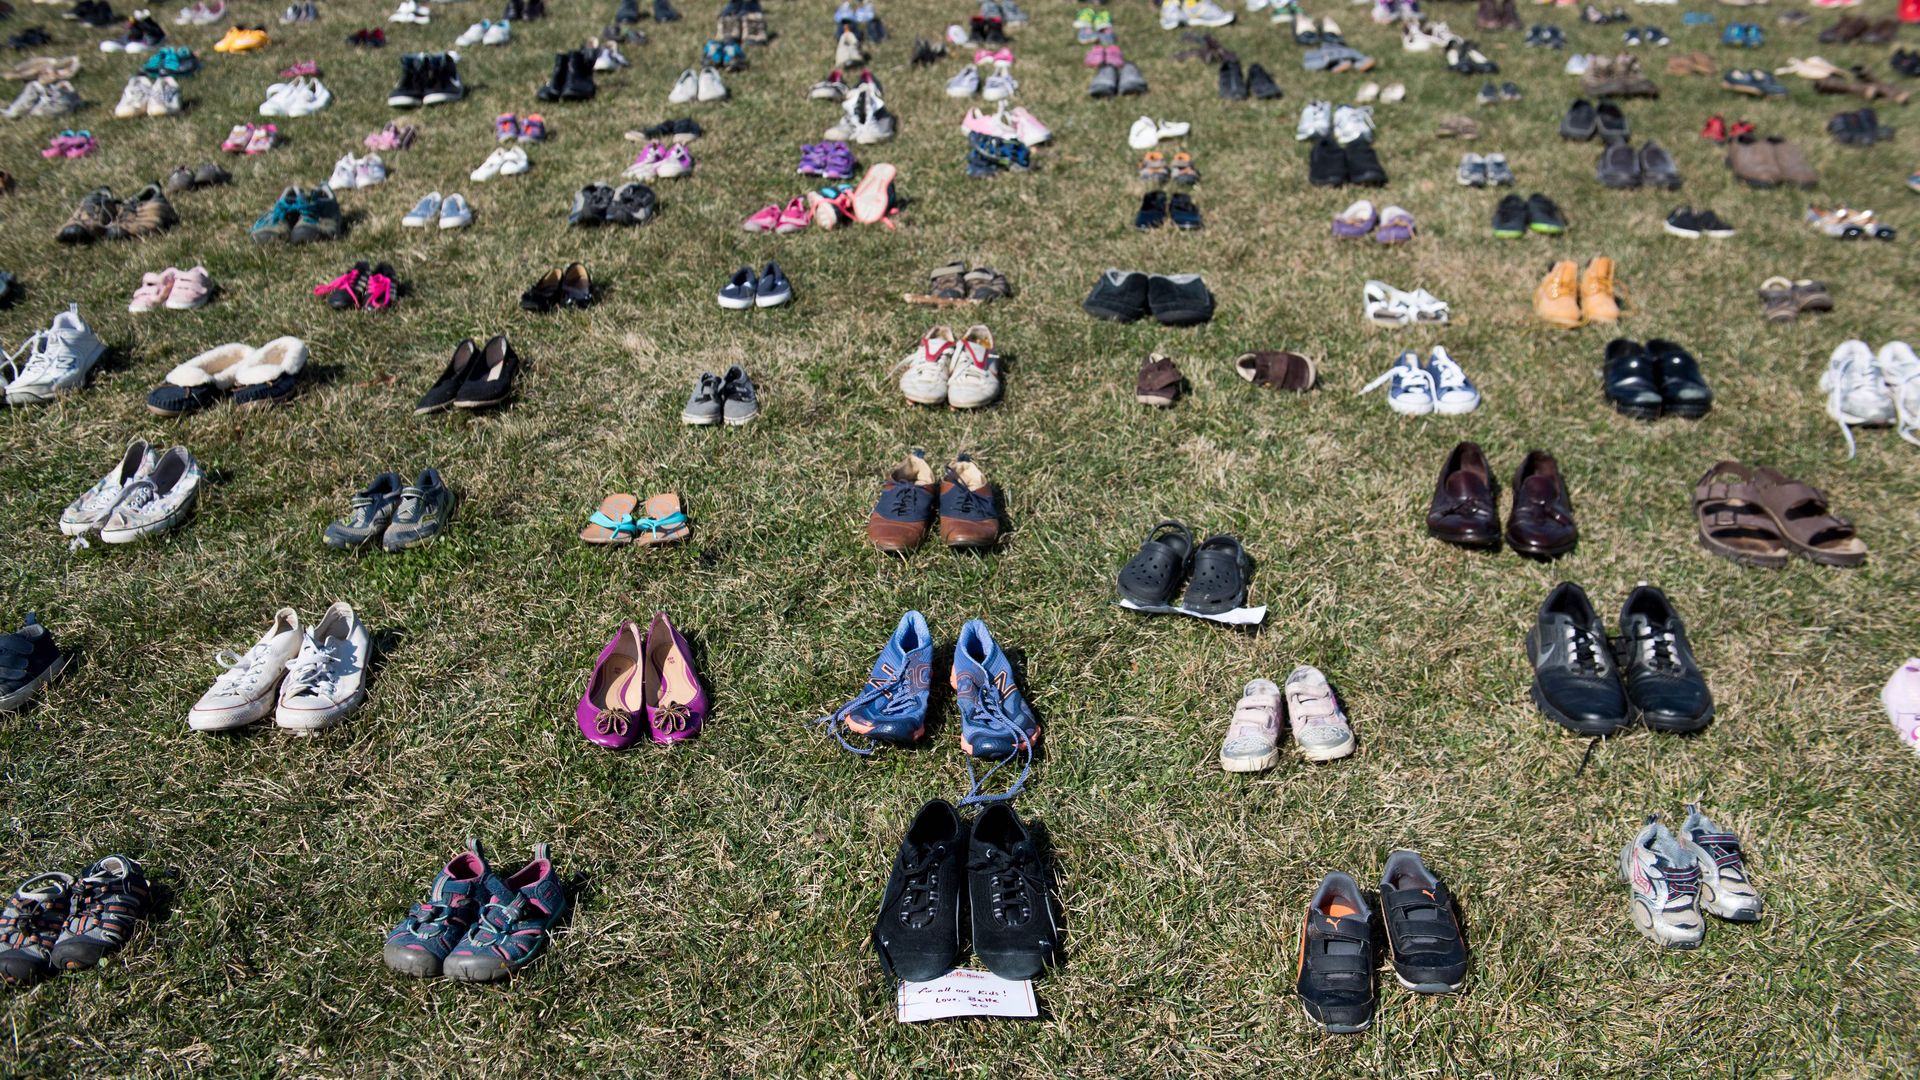 Photo of 7,000 pairs of empty shoes on the lawn outside the White House